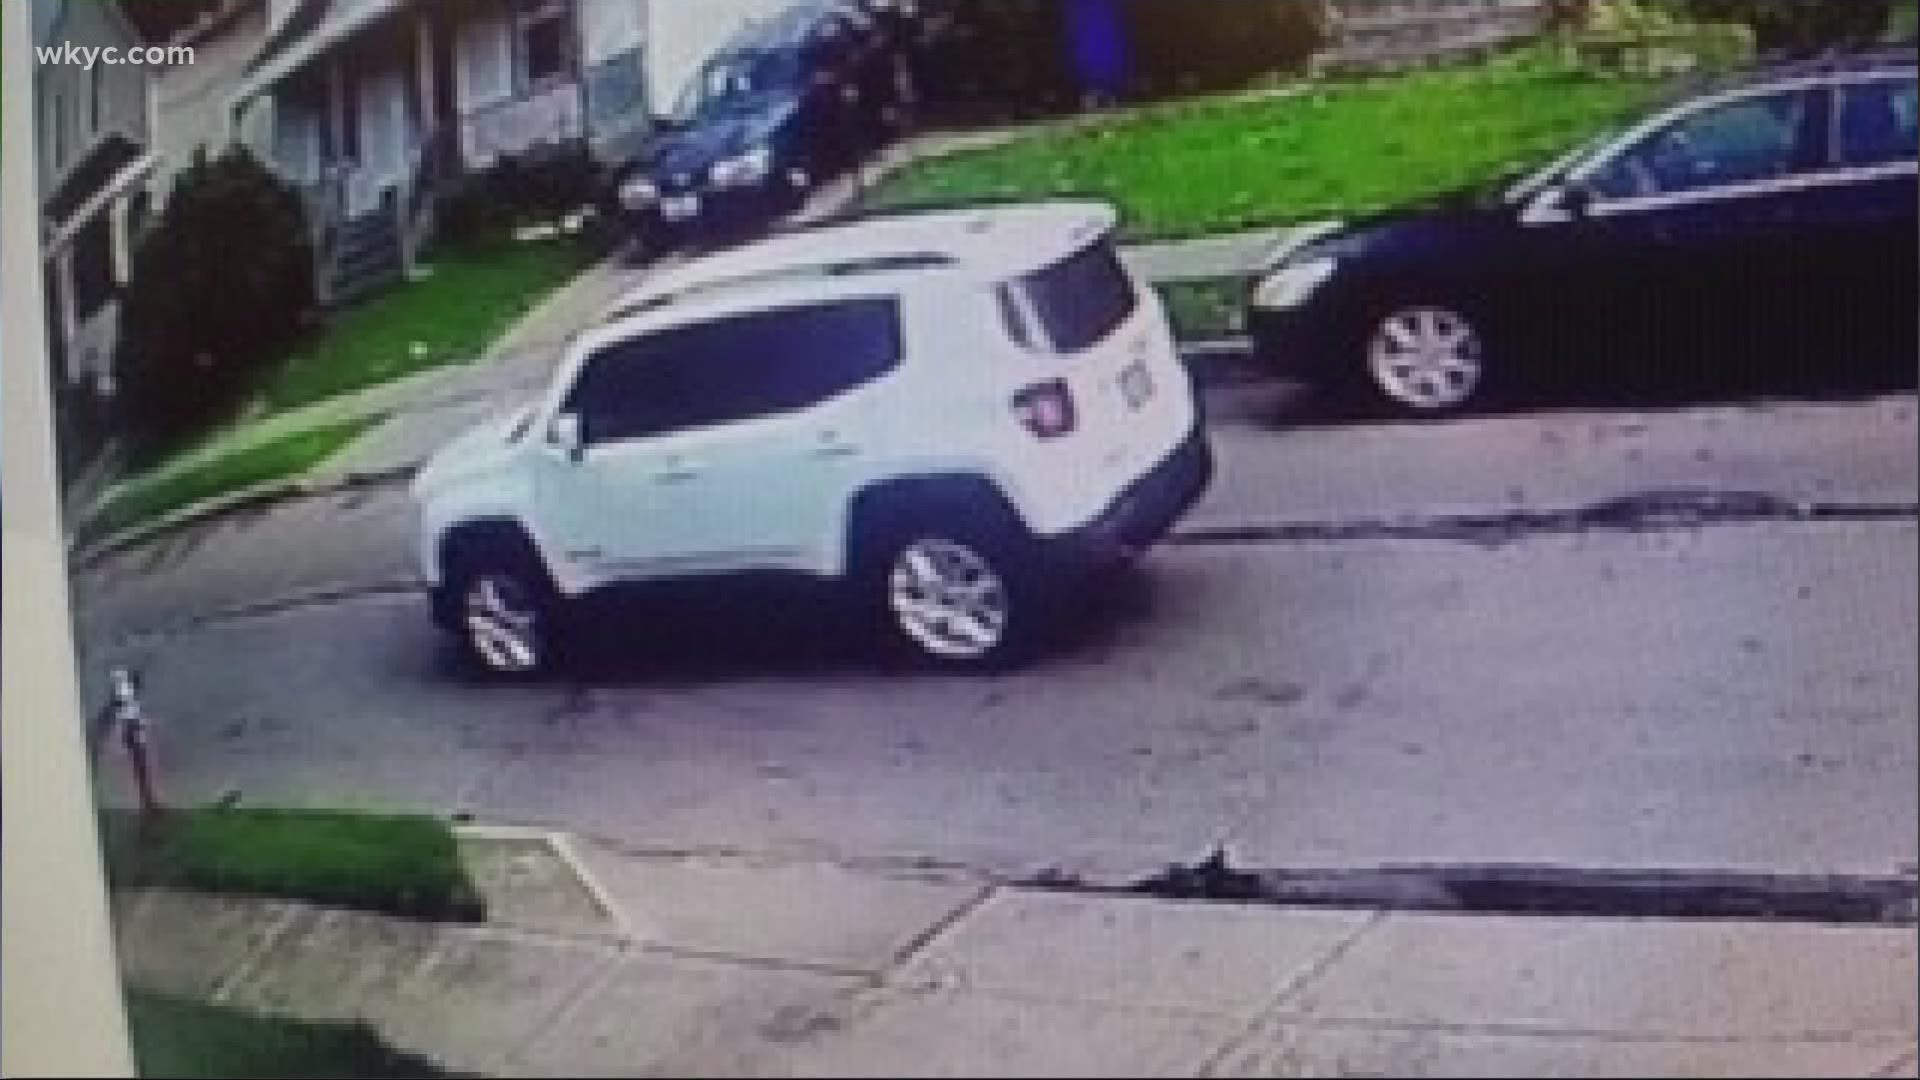 Cleveland police are searching for the driver who struck a 4-year-old boy on West 41st Street near Trowbridge Avenue in a hit-and-run incident Aug. 2.